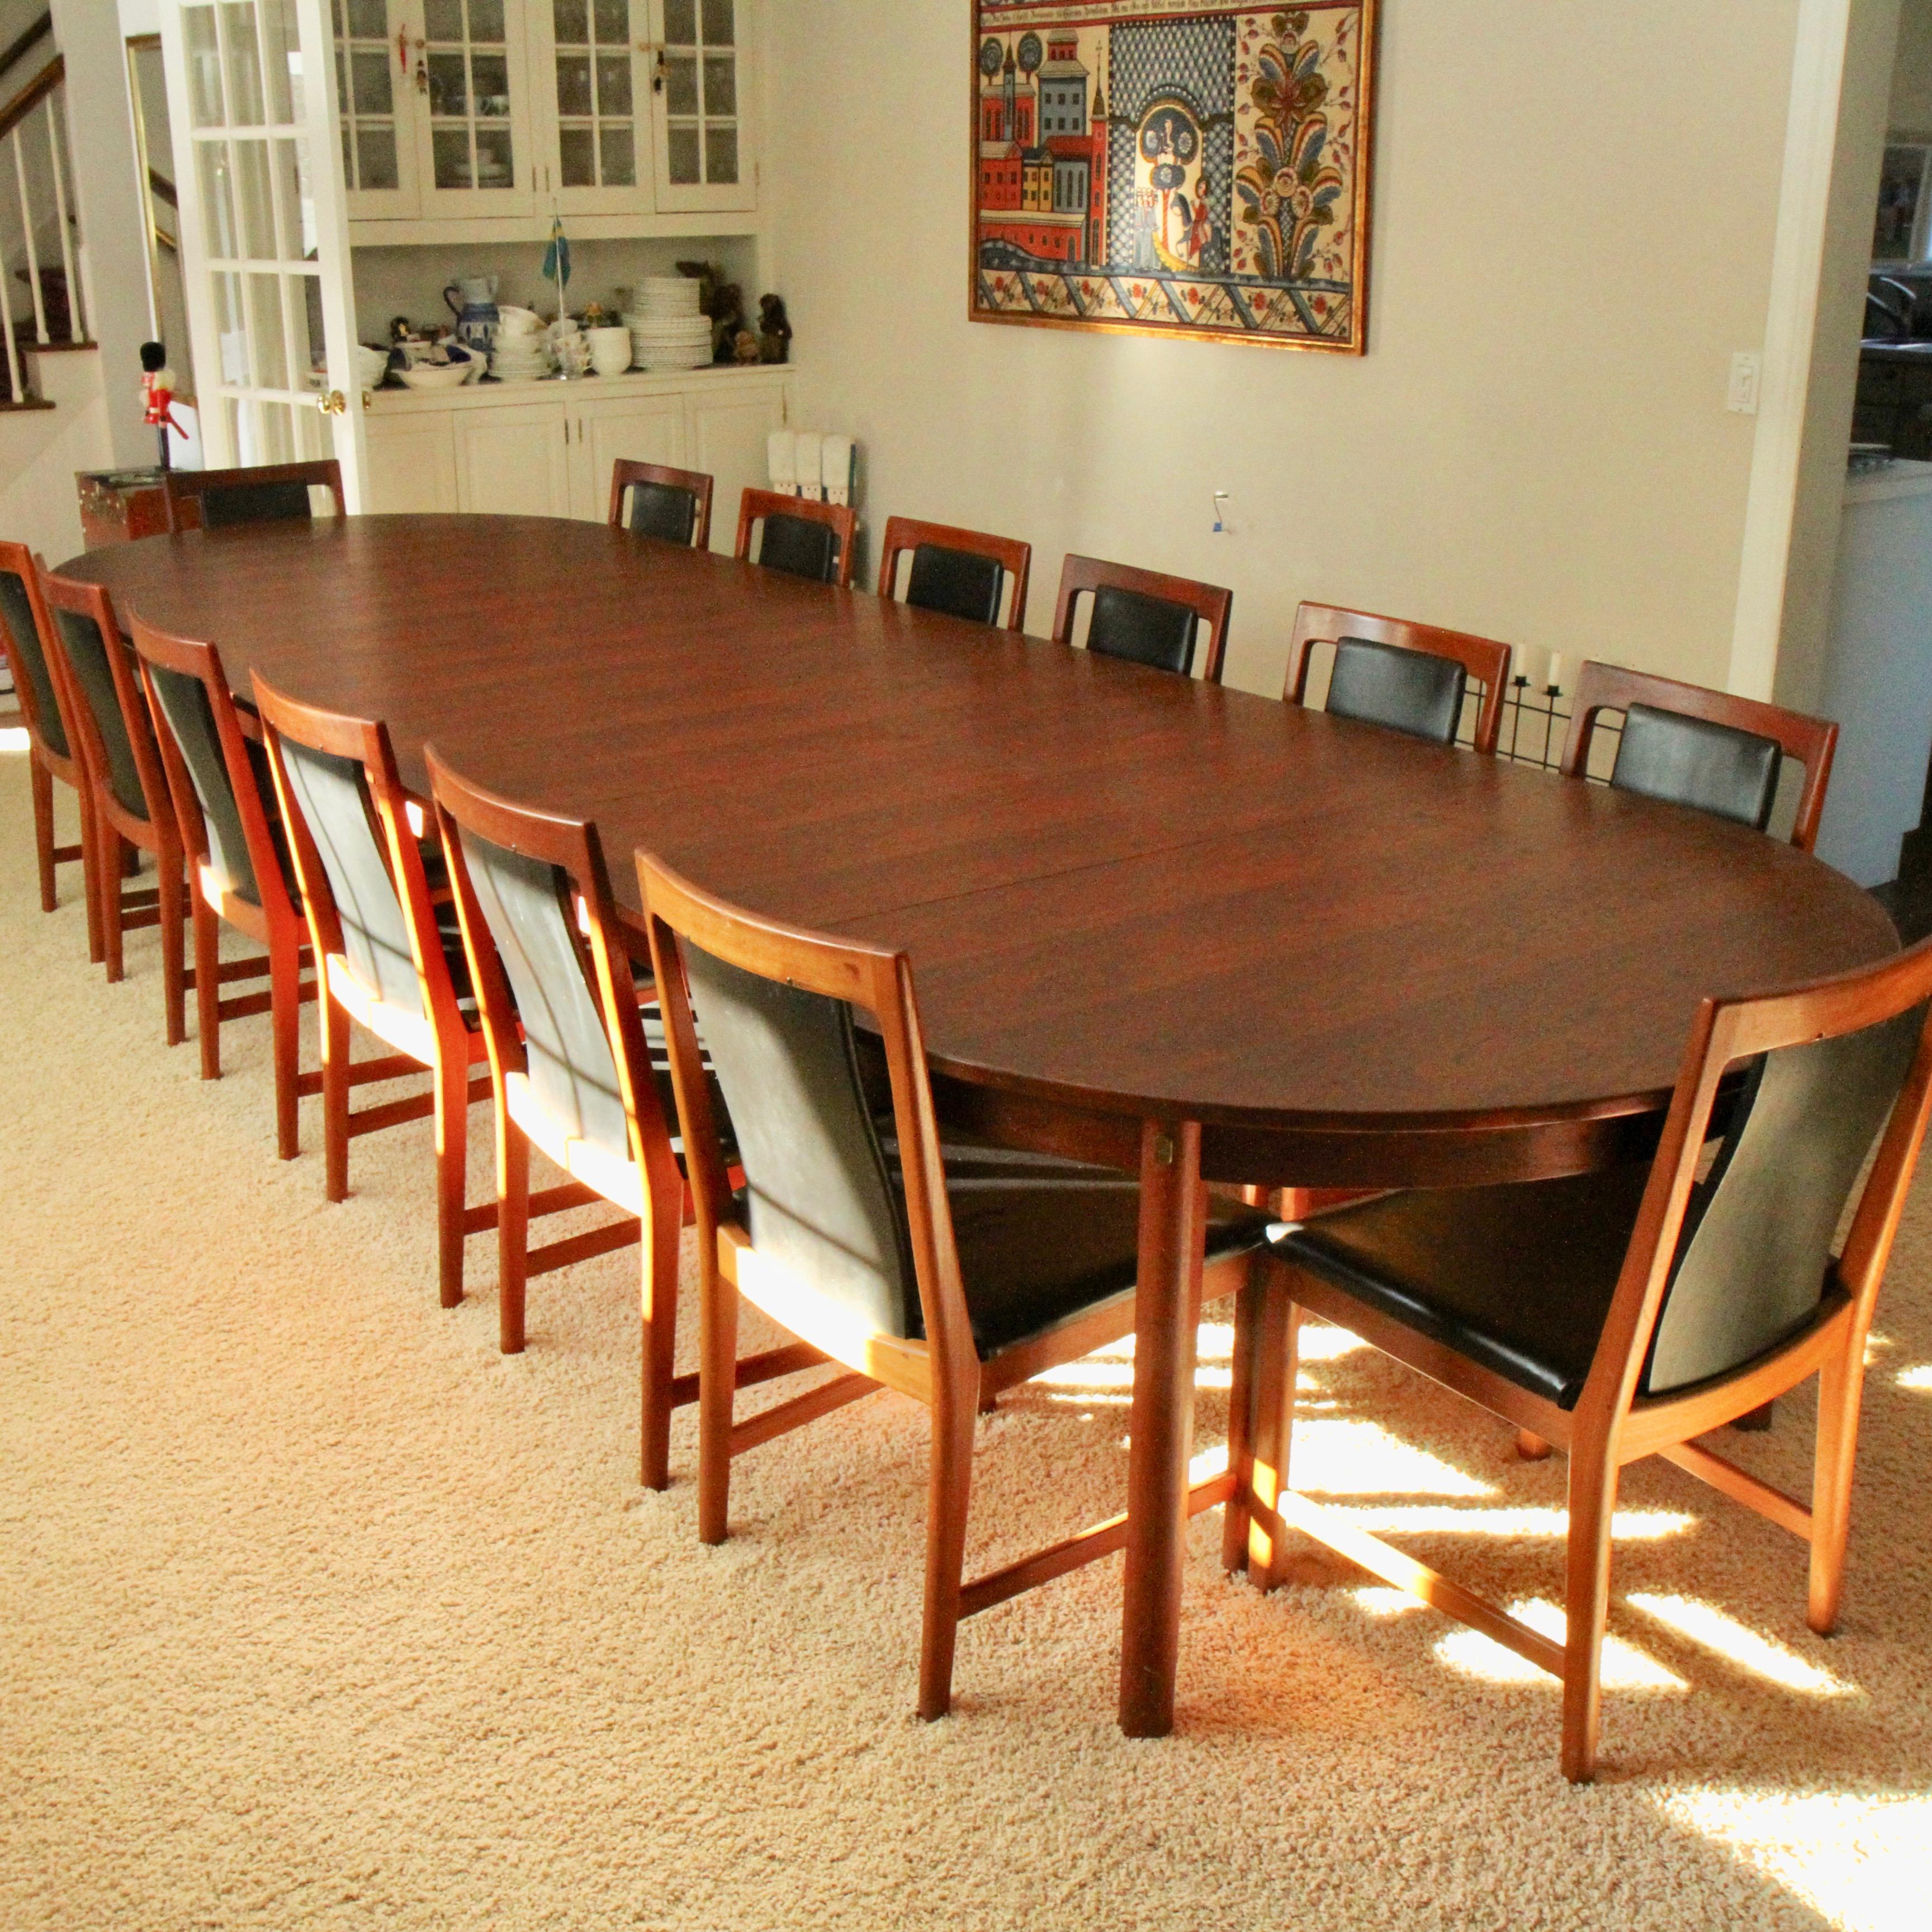 Teak dining table designed by Børge Mogensen for Karl Andersson & Söner in the 1960s. The table belongs to the Øresund series and has model number 140. The table without leaves measures 67